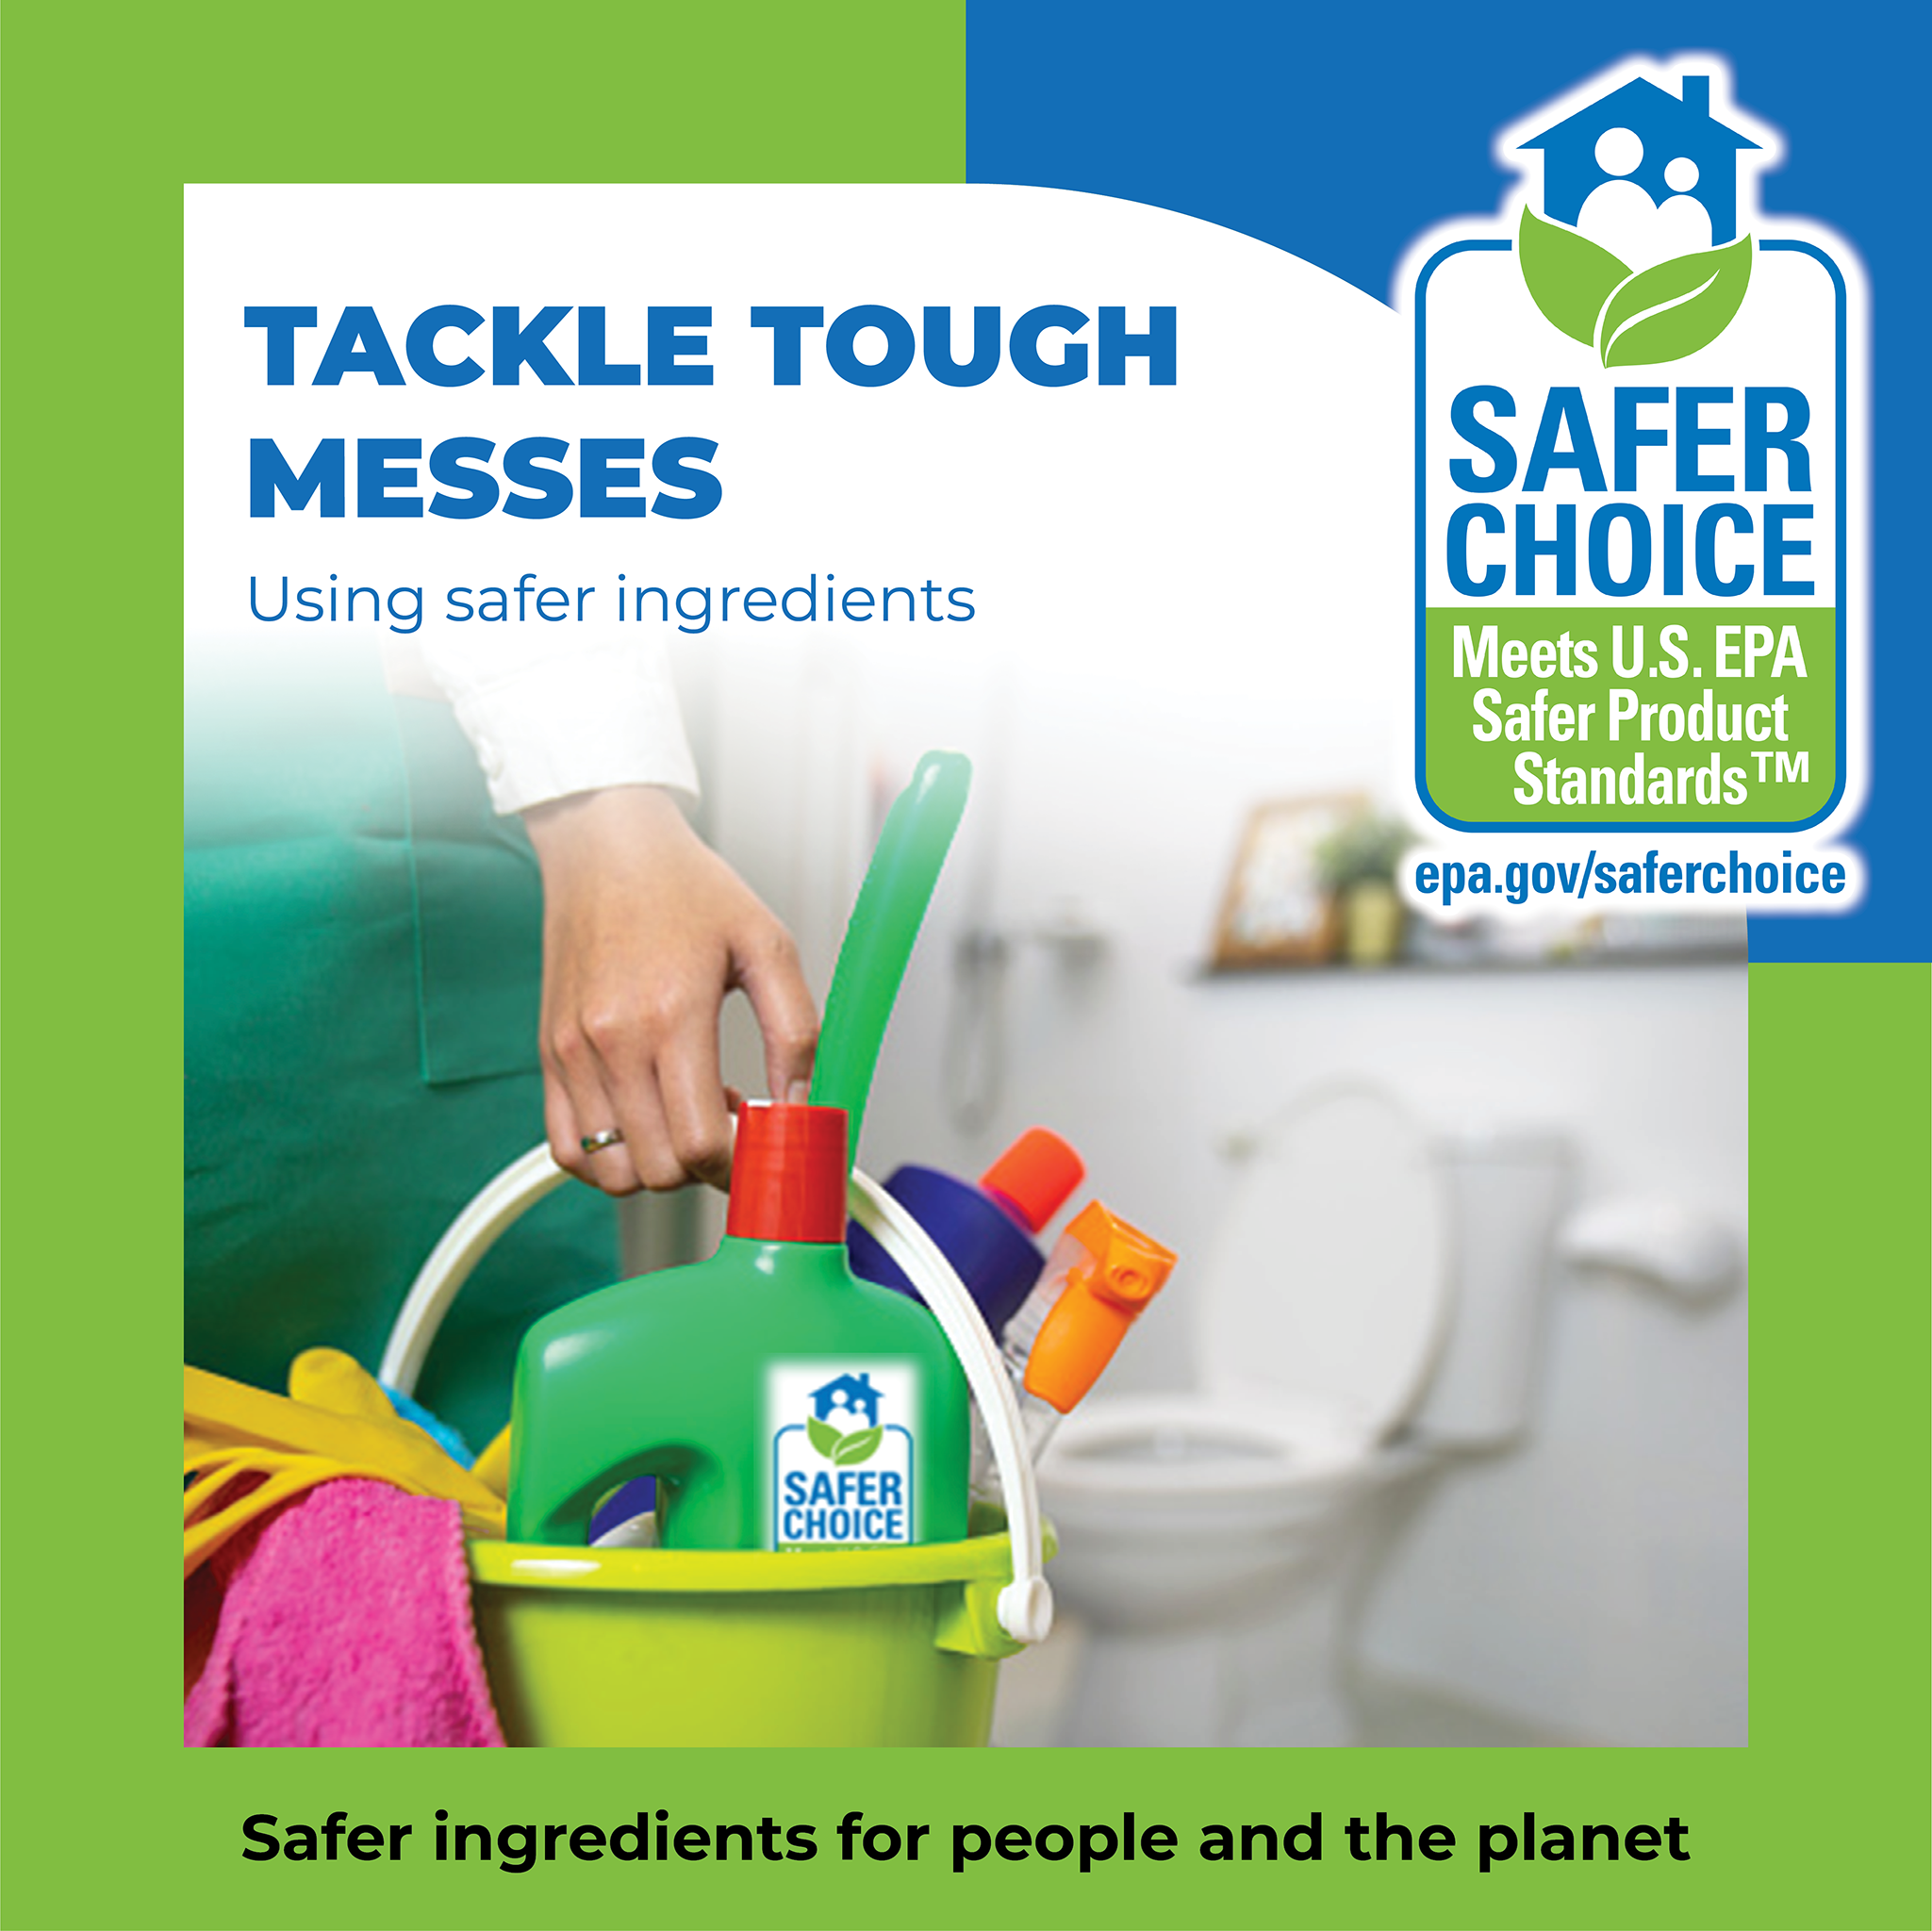 EPA Safer Choice Certified Cleaning Products - ECOS®